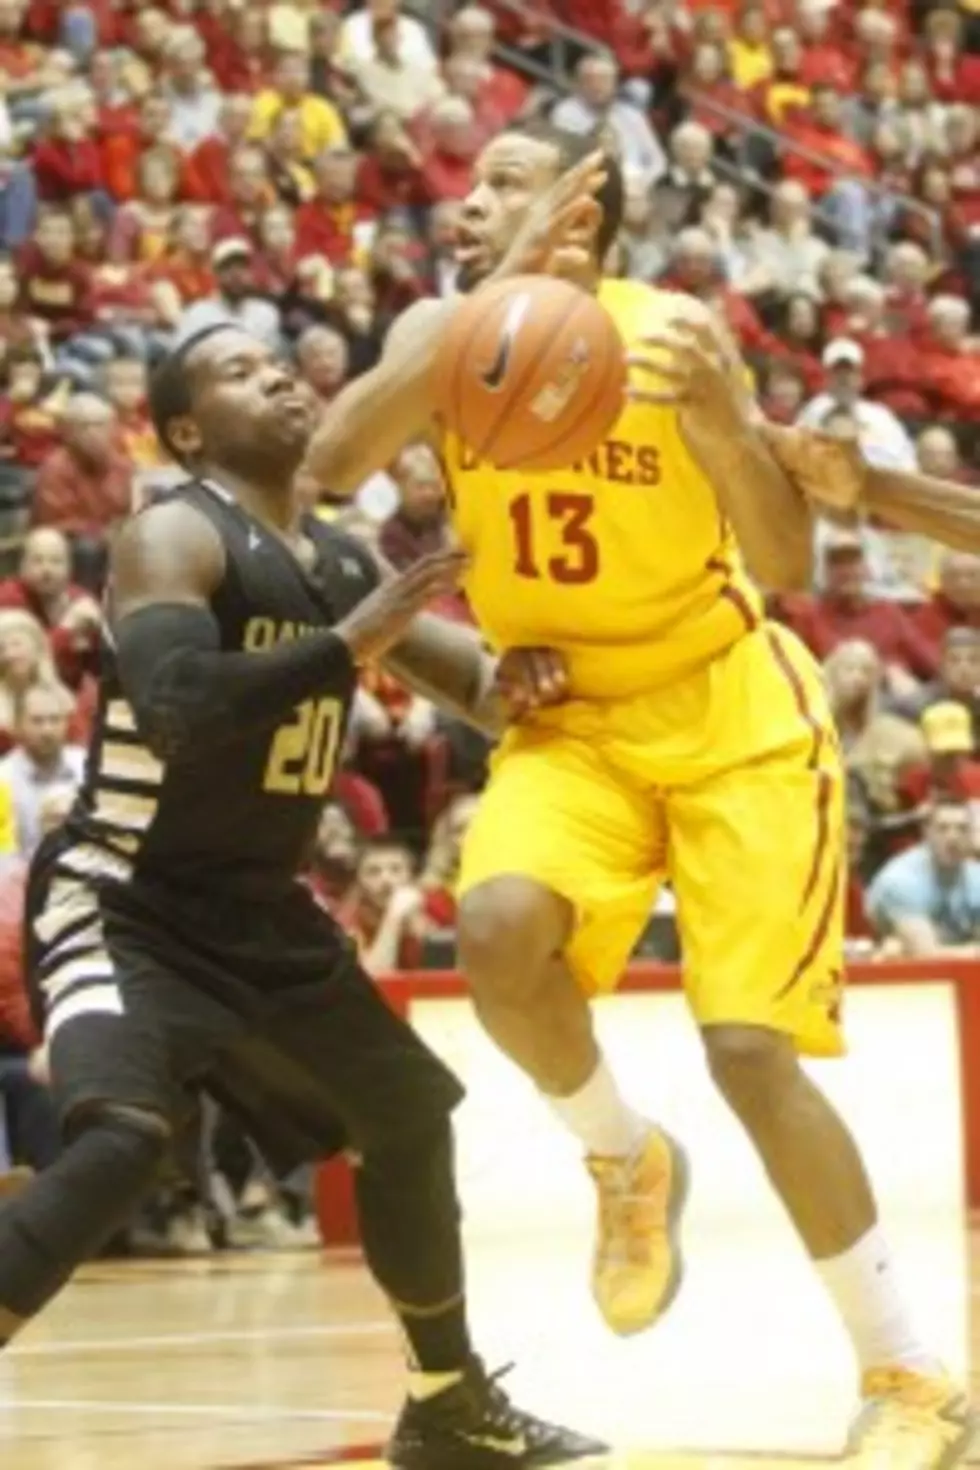 New Update: Iowa State Basketball Star Suspended For Rivalry Game At Iowa